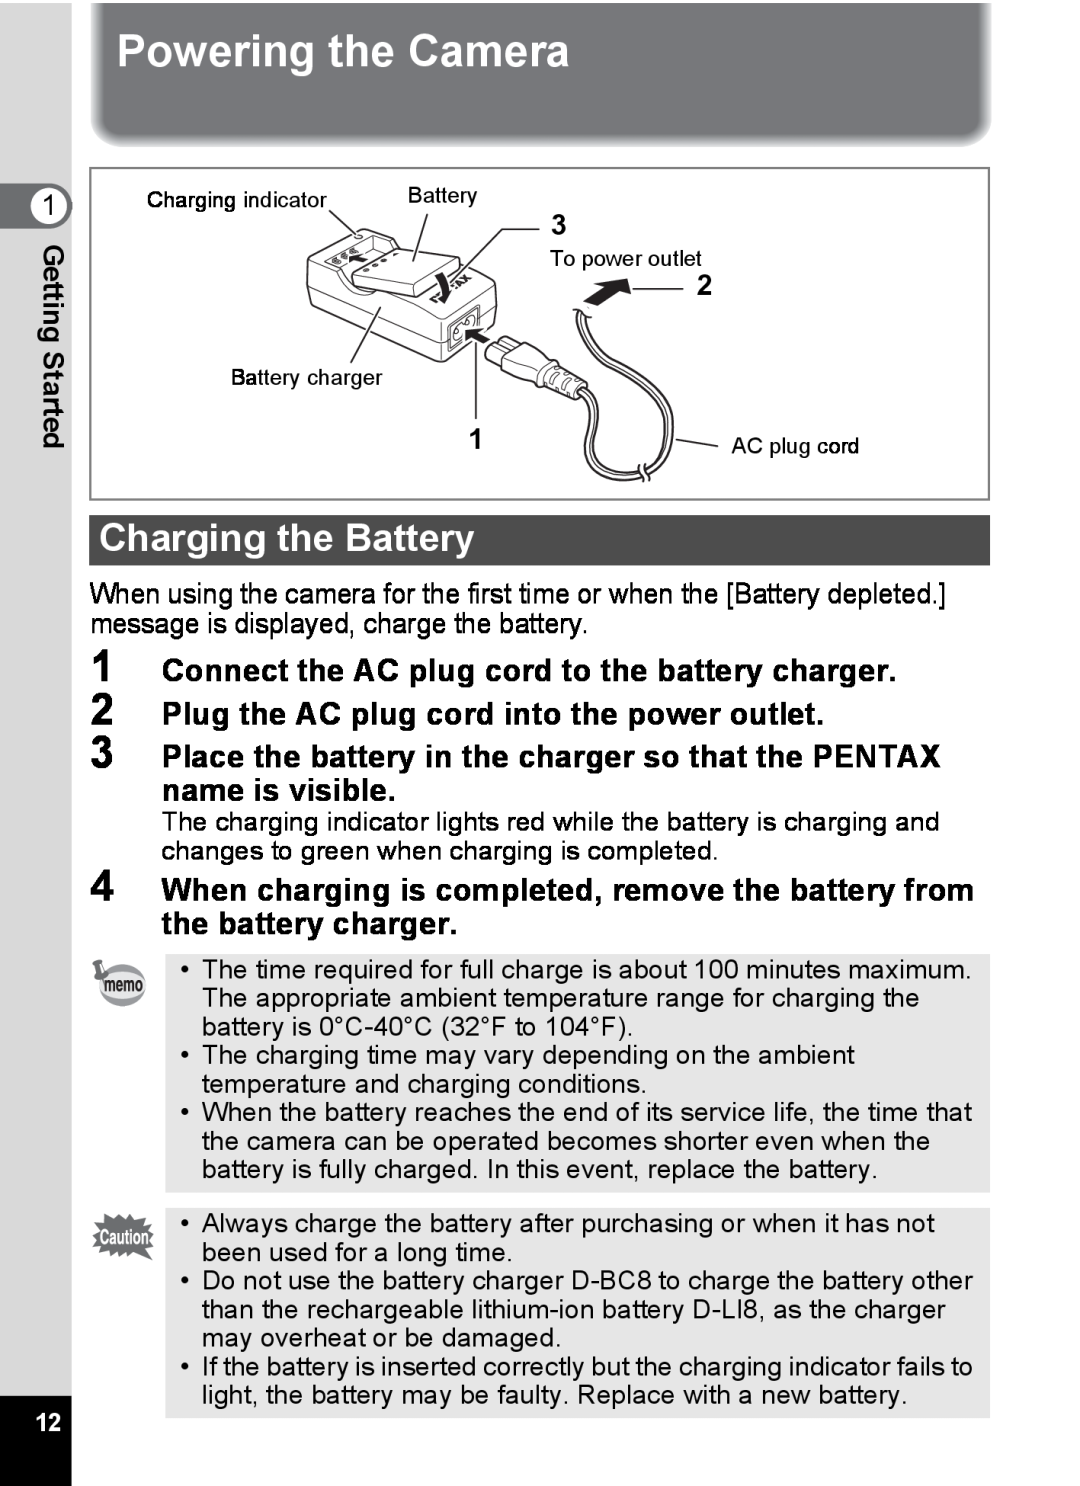 Pentax S4 manual Powering the Camera, Charging the Battery, Connect the AC plug cord to the battery charger 